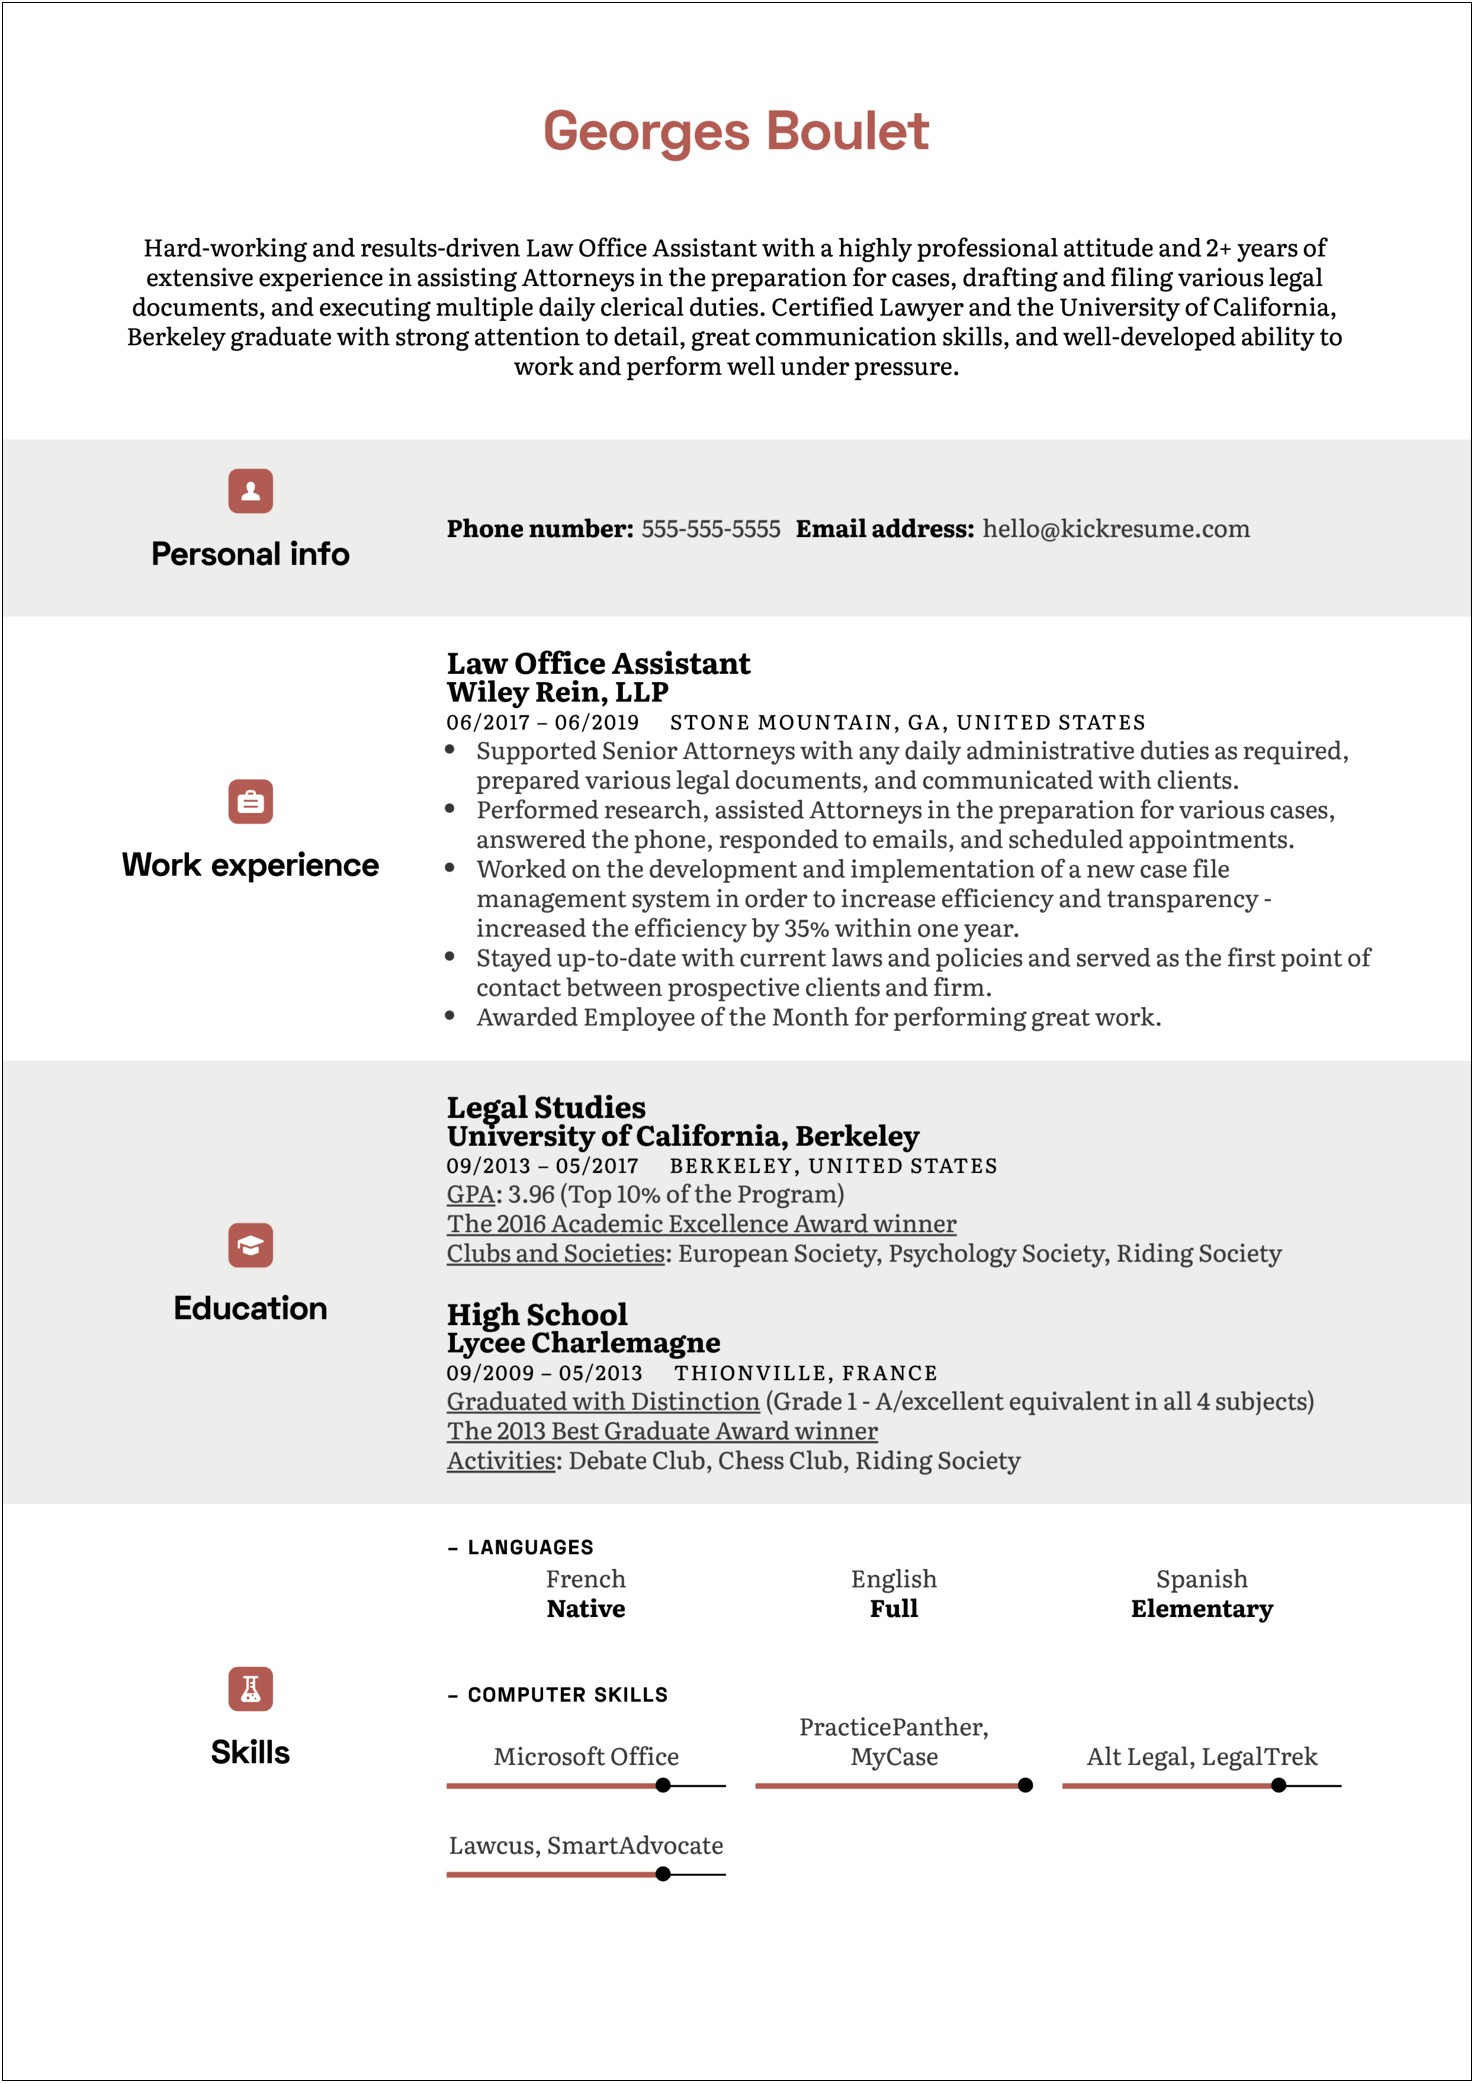 Corporate Legal Assistant Resume Samples